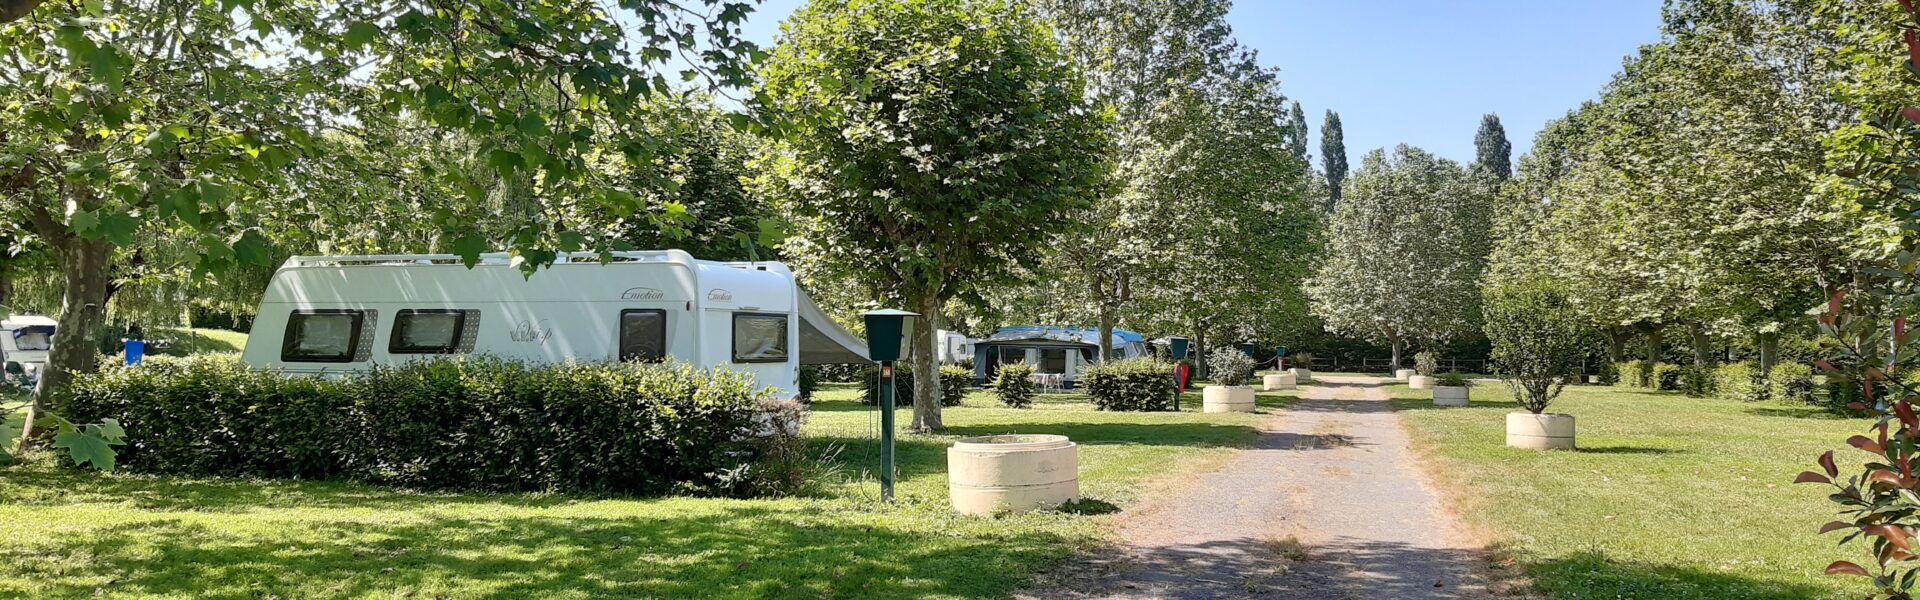 emplacement caravane camping Thoissey